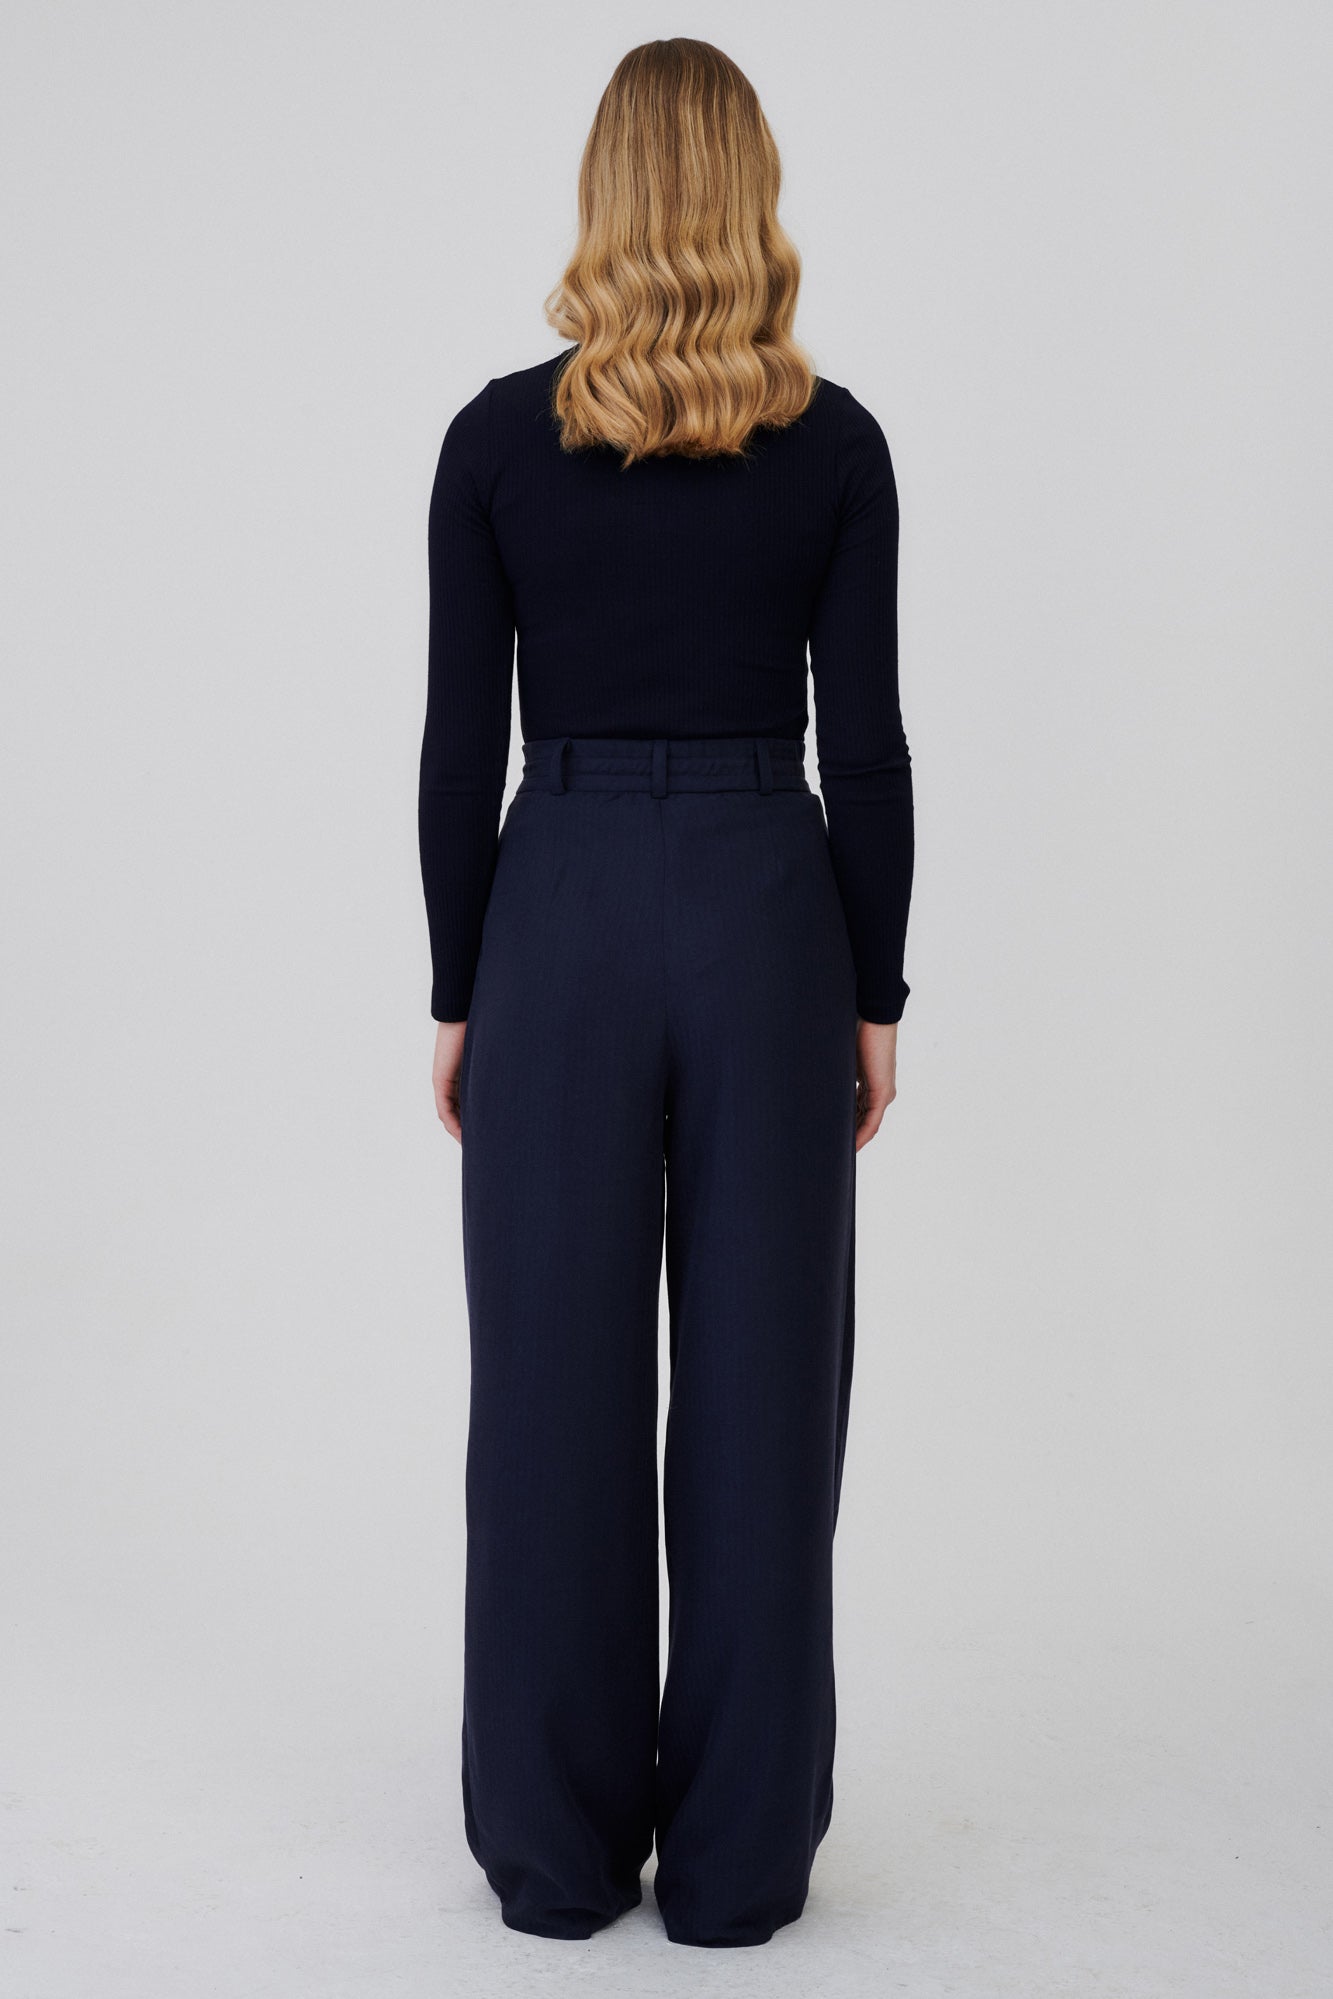 Lyocell trousers / 05 / 02 / blueberry *longsleeve-in-organic-cotton-14-01-night-blue* ?The model is 177cm tall and wears size S?